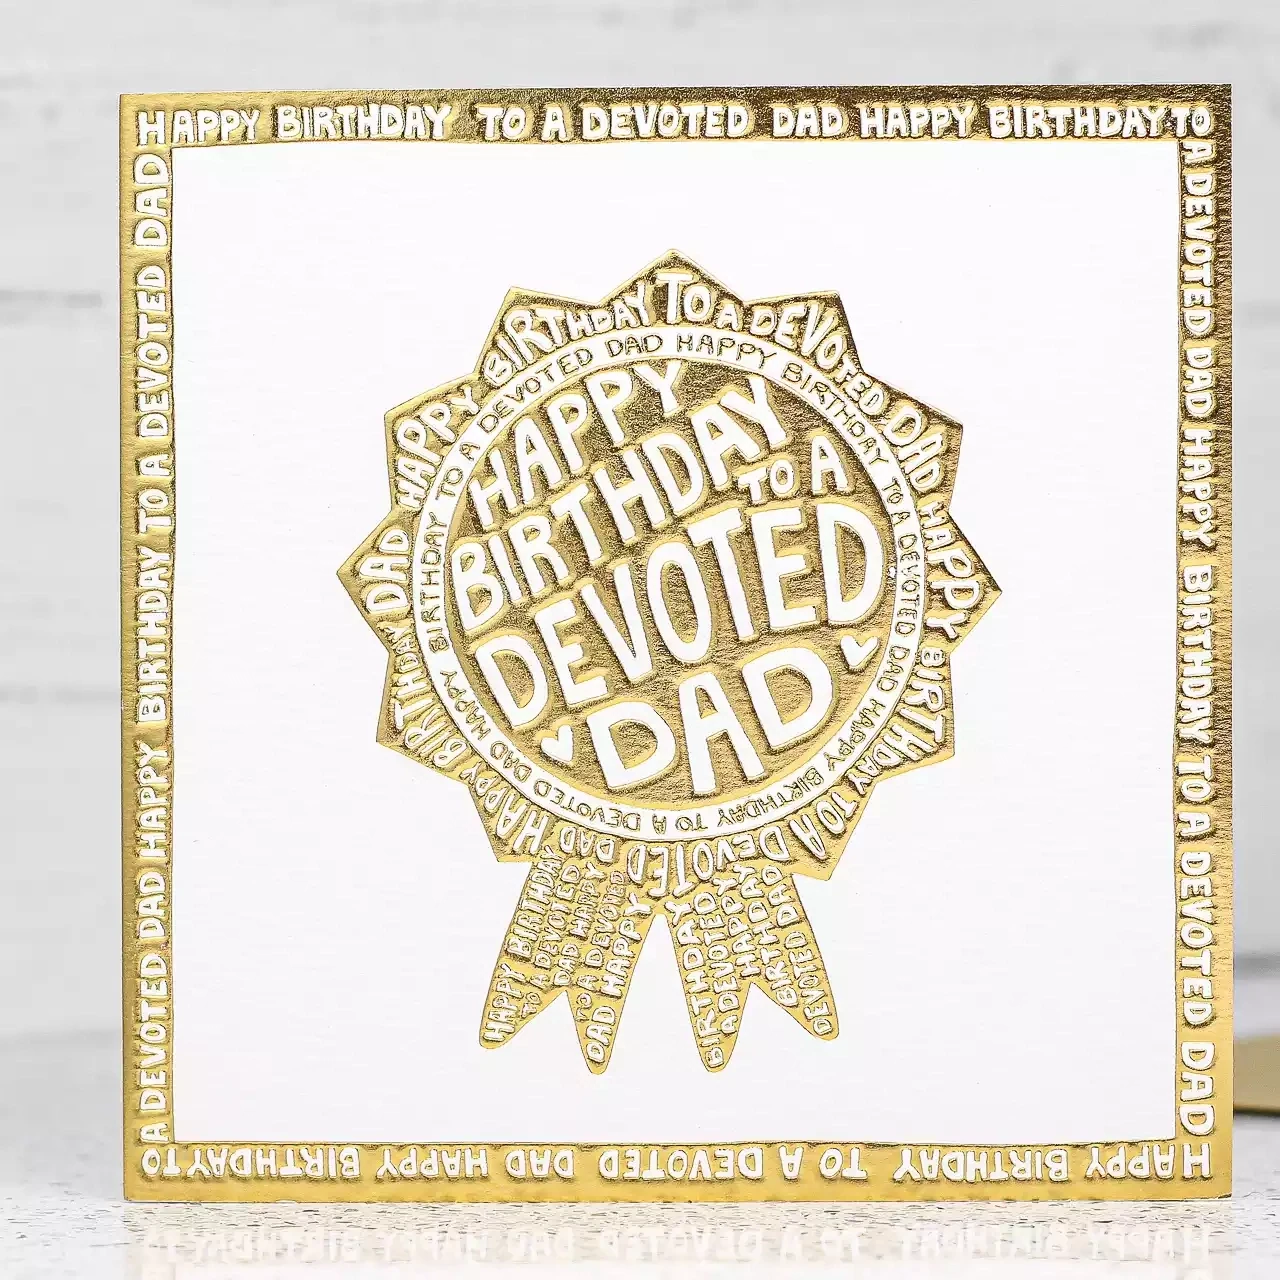 Devoted Dad Birthday Card by Paper Sole